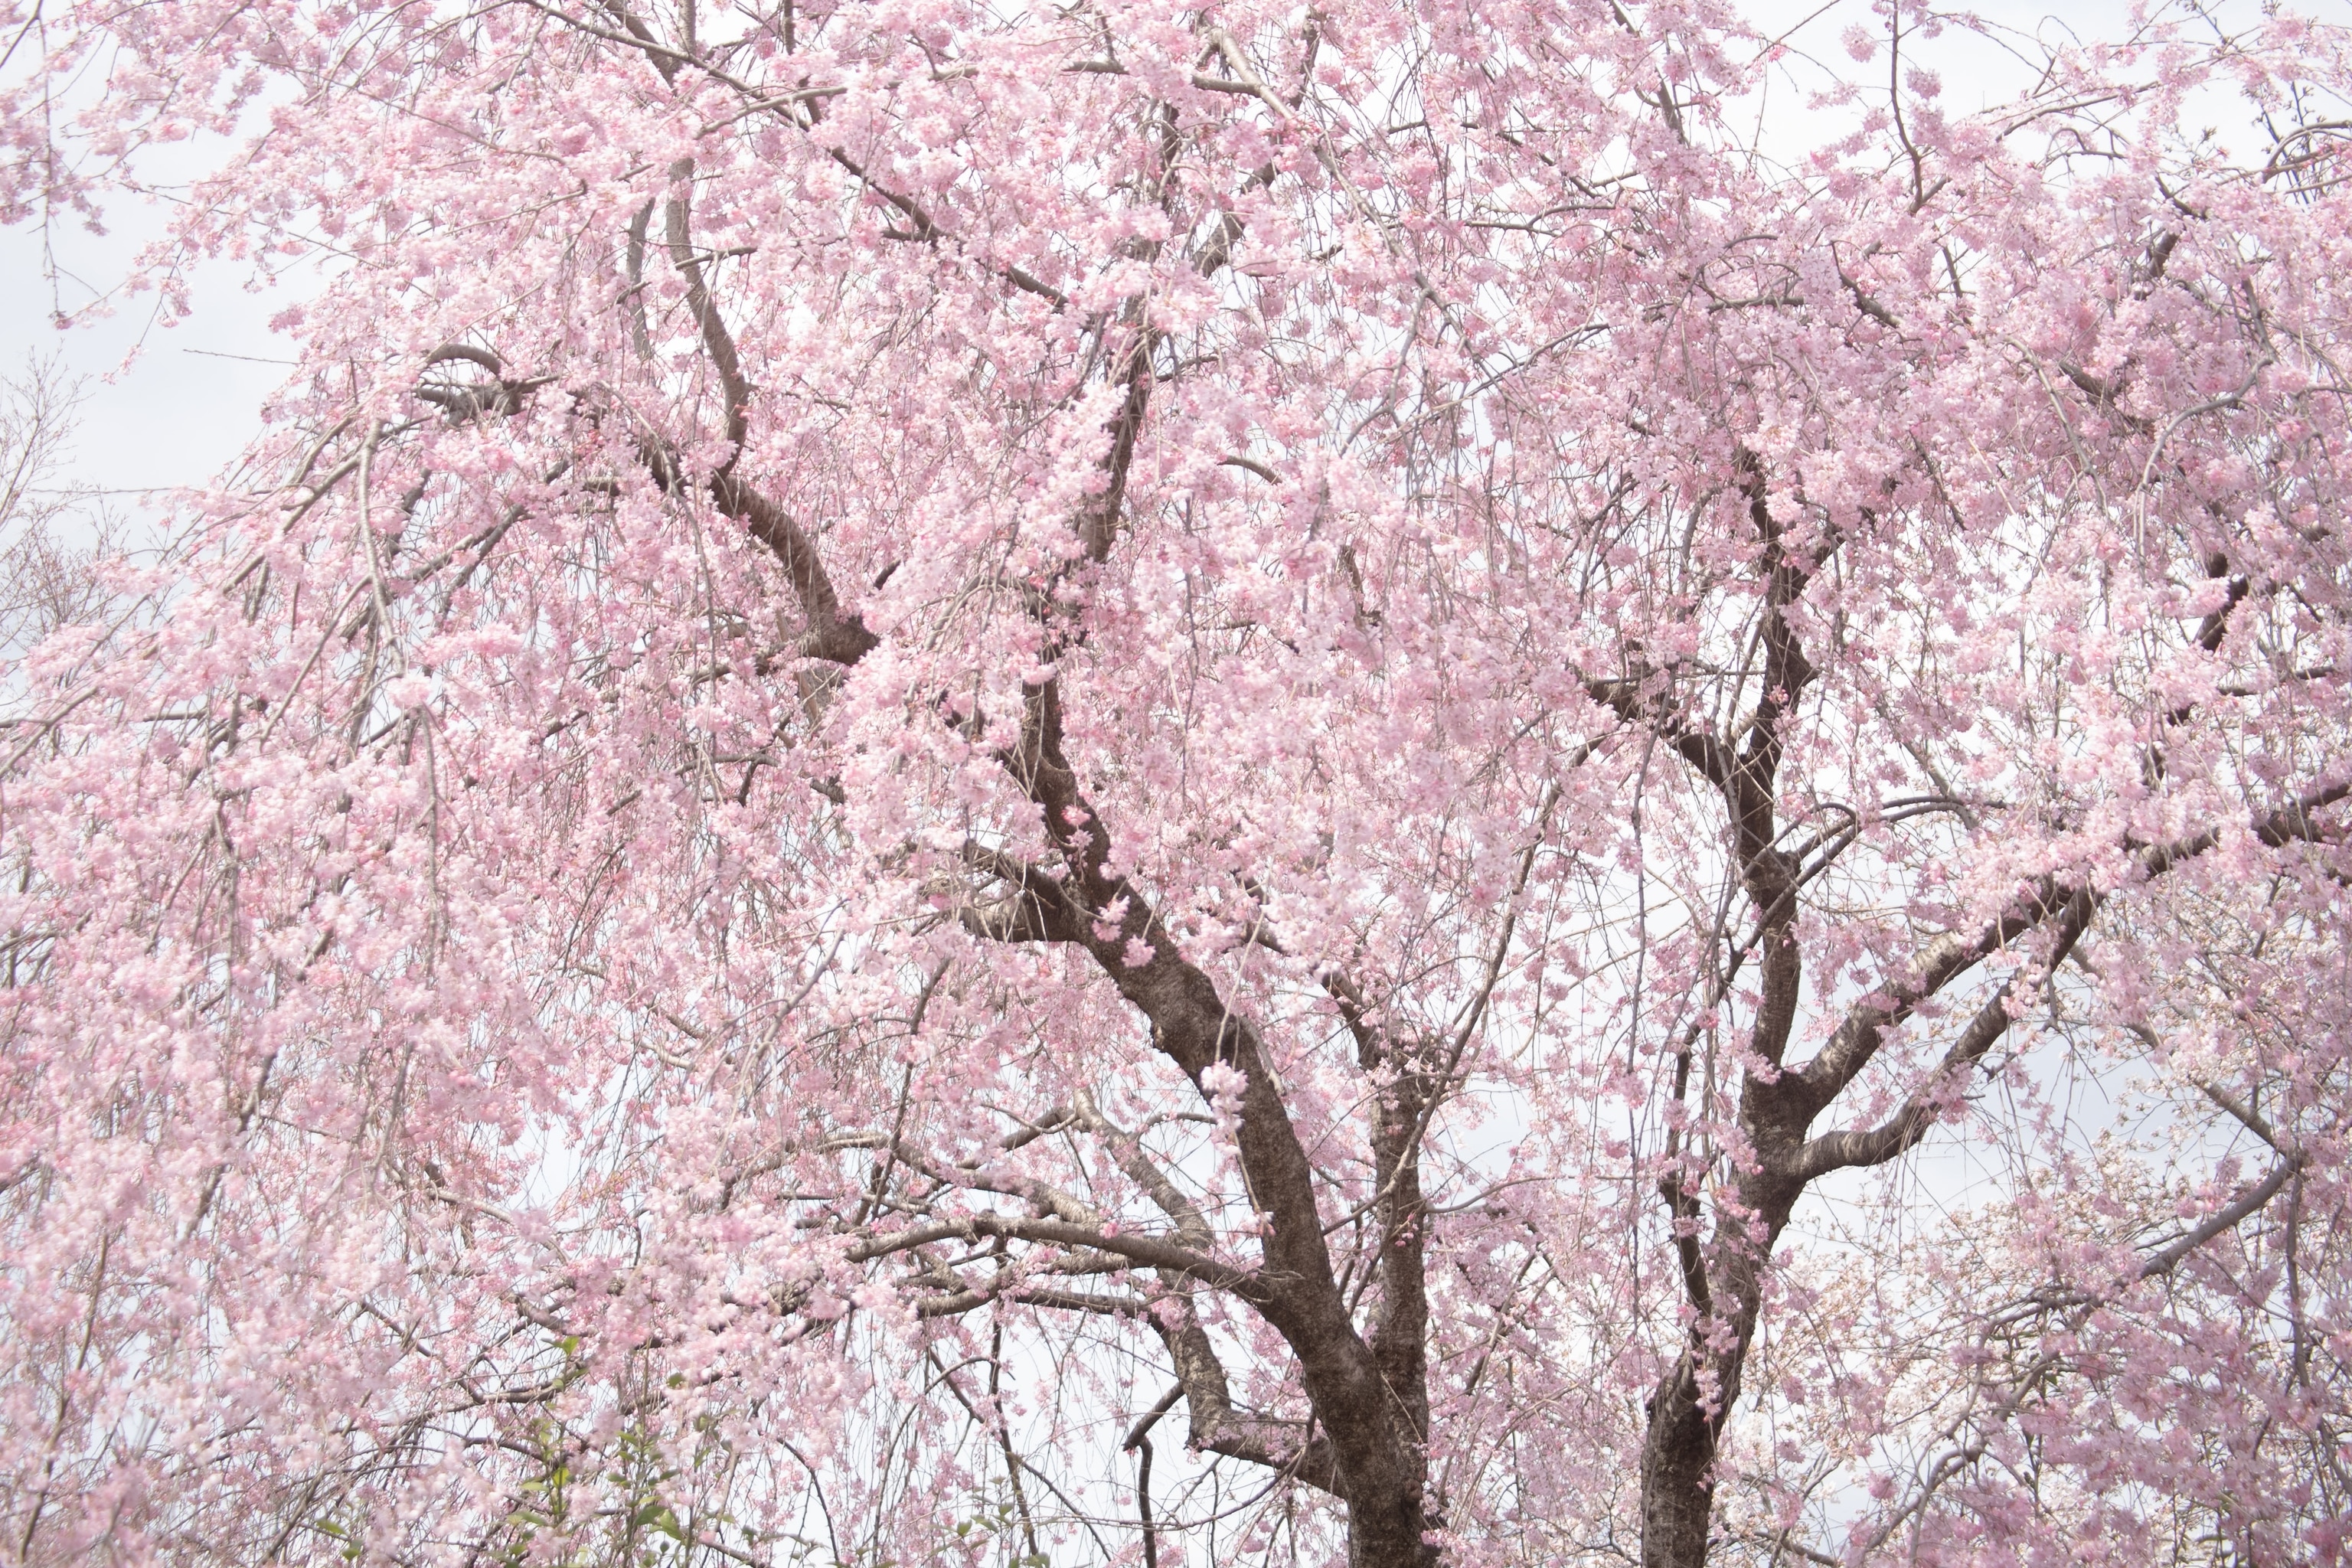 A pink cherry blossom tree in bloom in Kyoto.